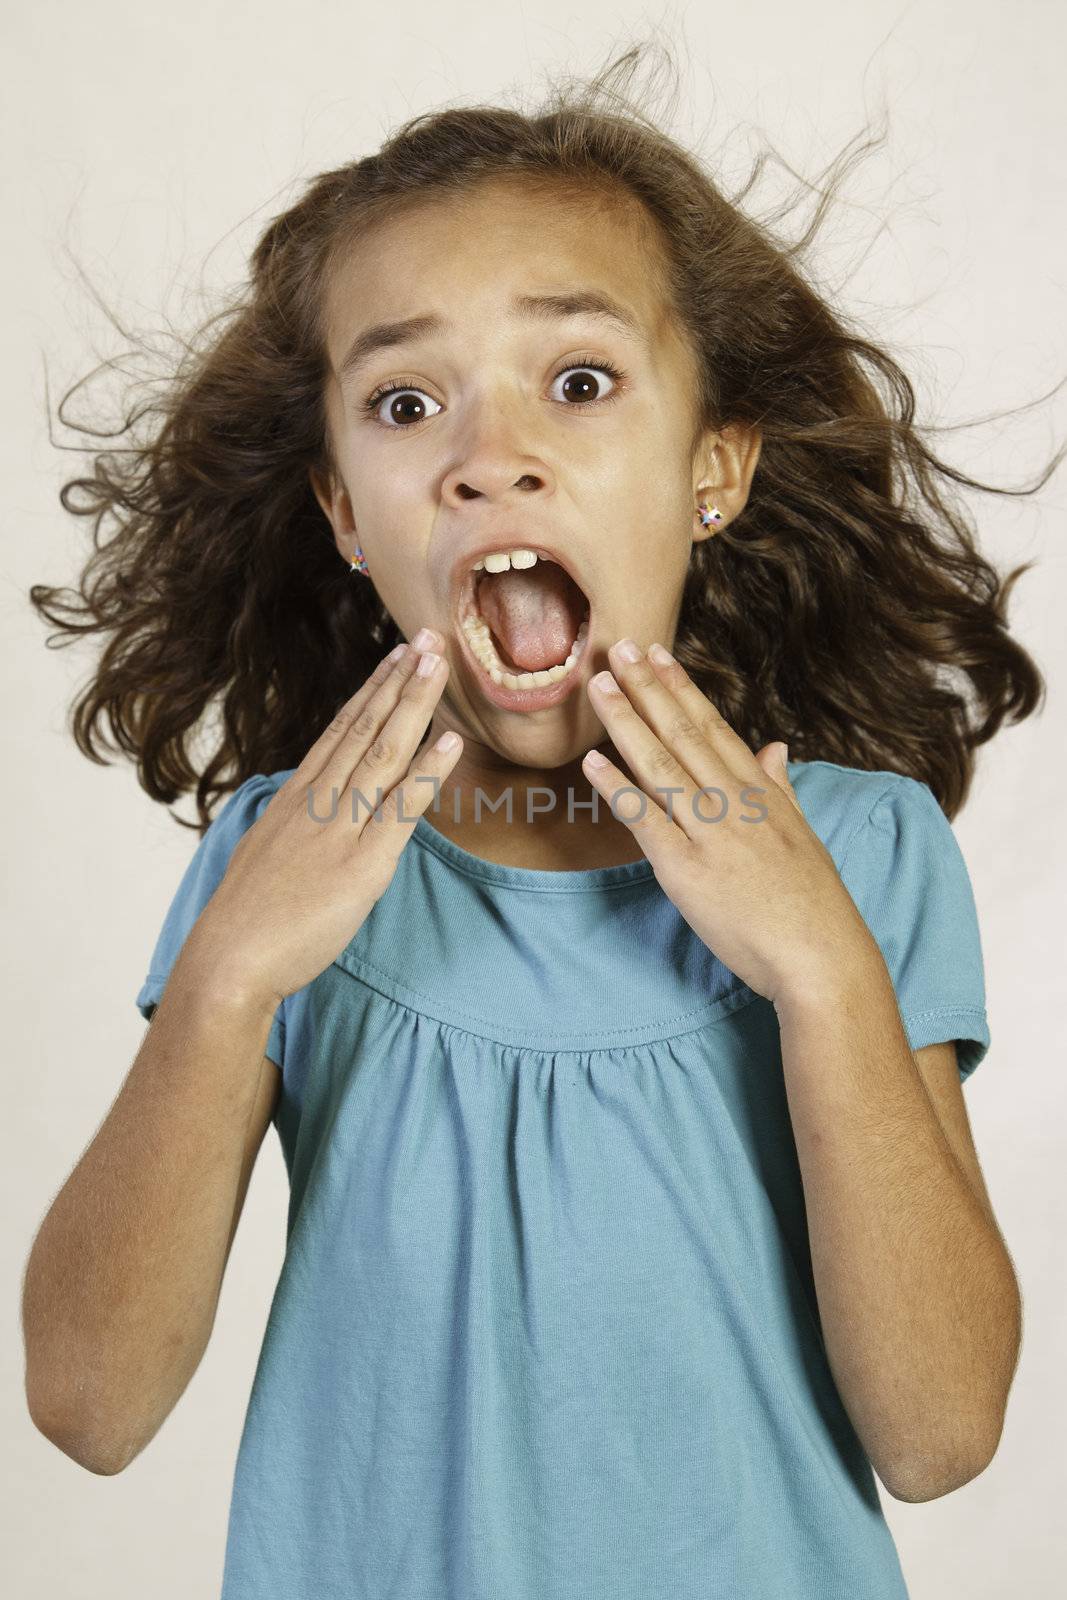 Cute Hispanic girl with shocked expression